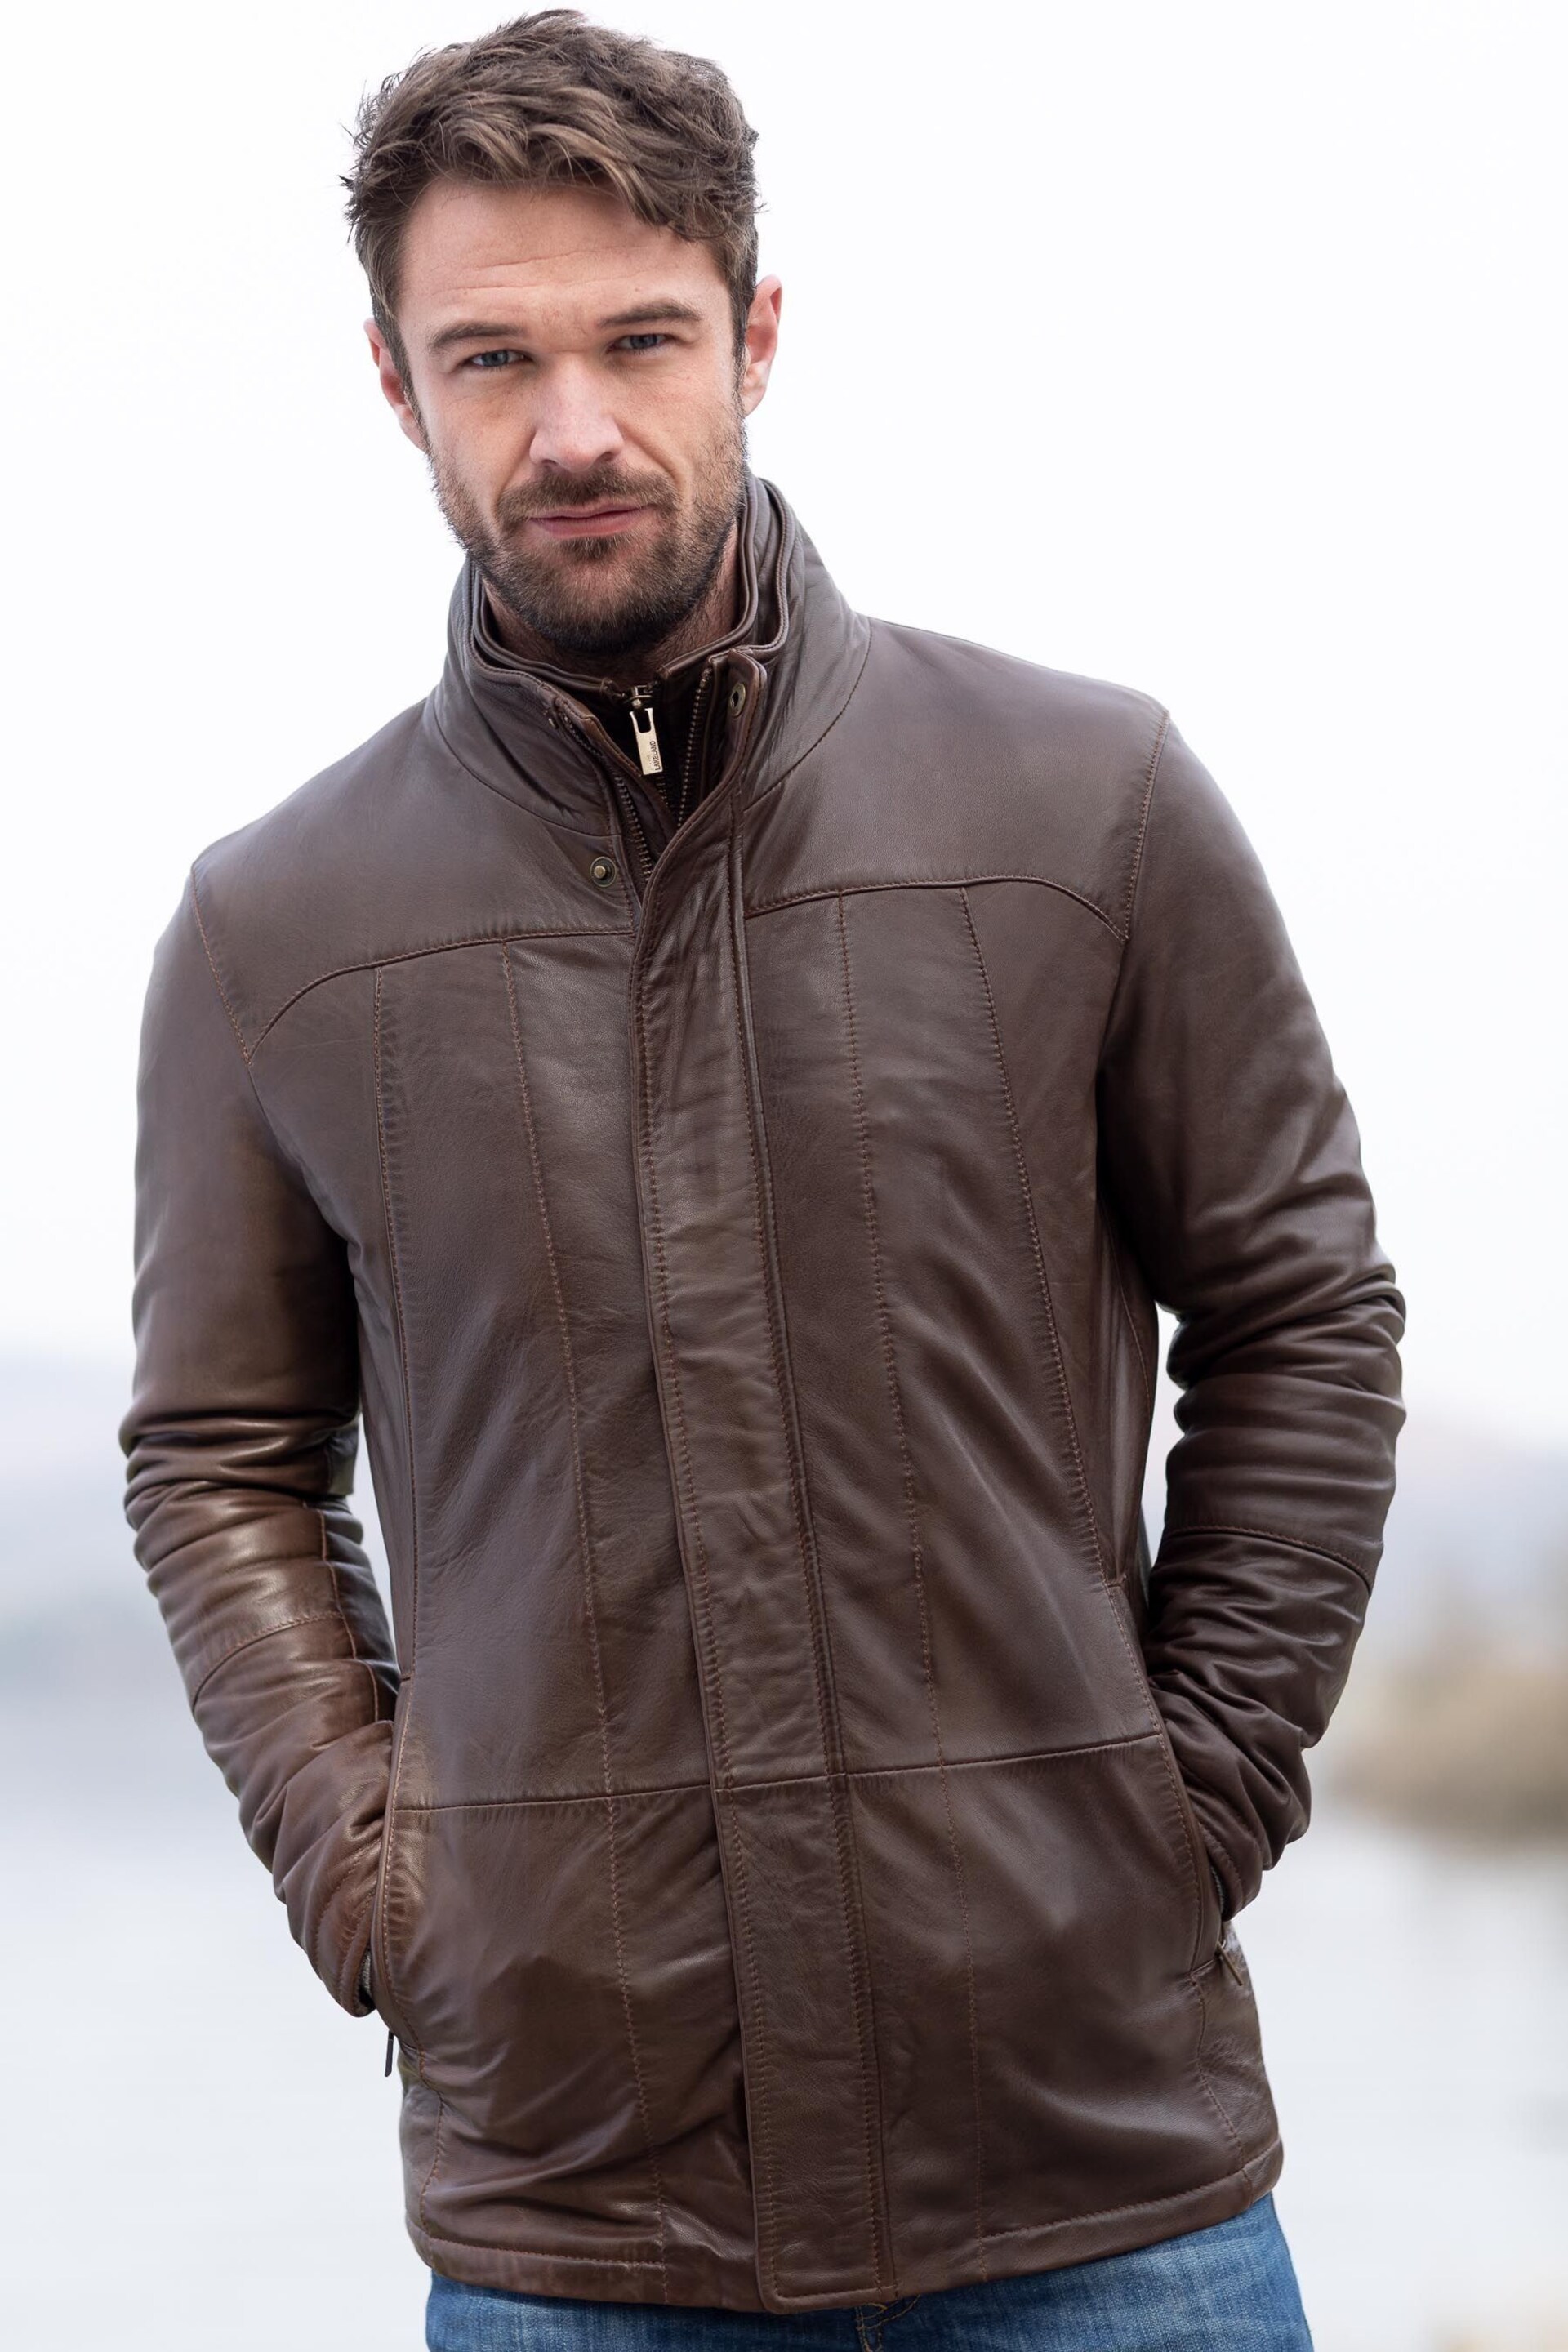 Lakeland Leather Brown Garsdale Leather Coat - Image 1 of 5